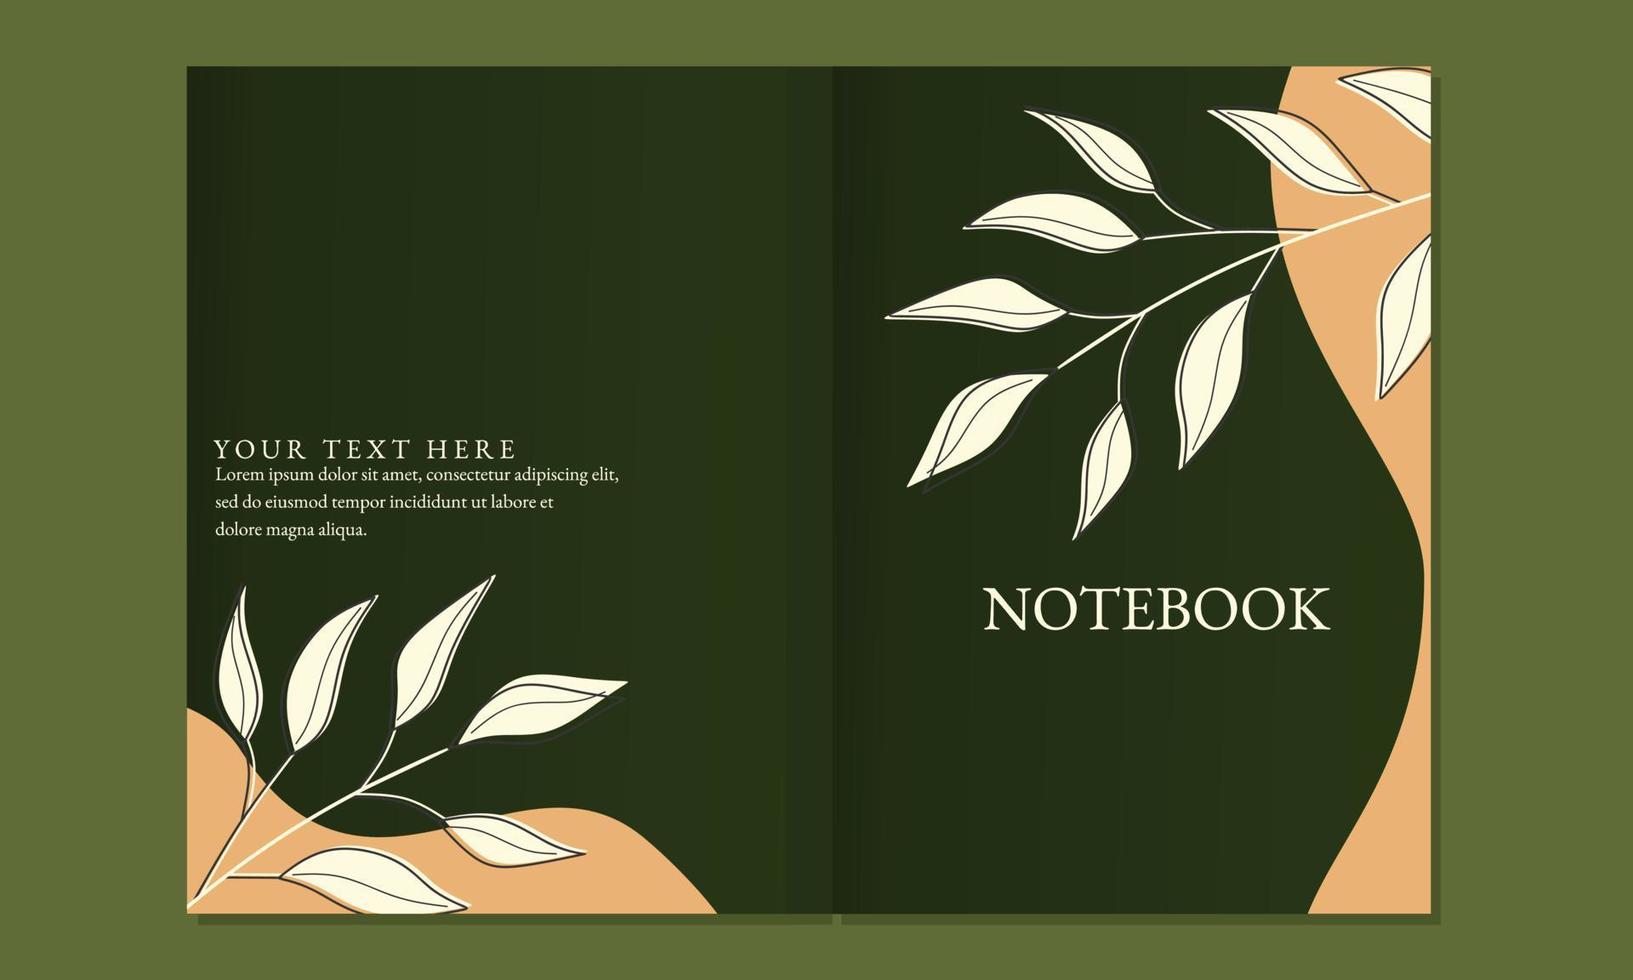 set of green color book cover designs with abstract leaf elements. natural background. A4 size for notebooks, diaries, journals, posters. vector